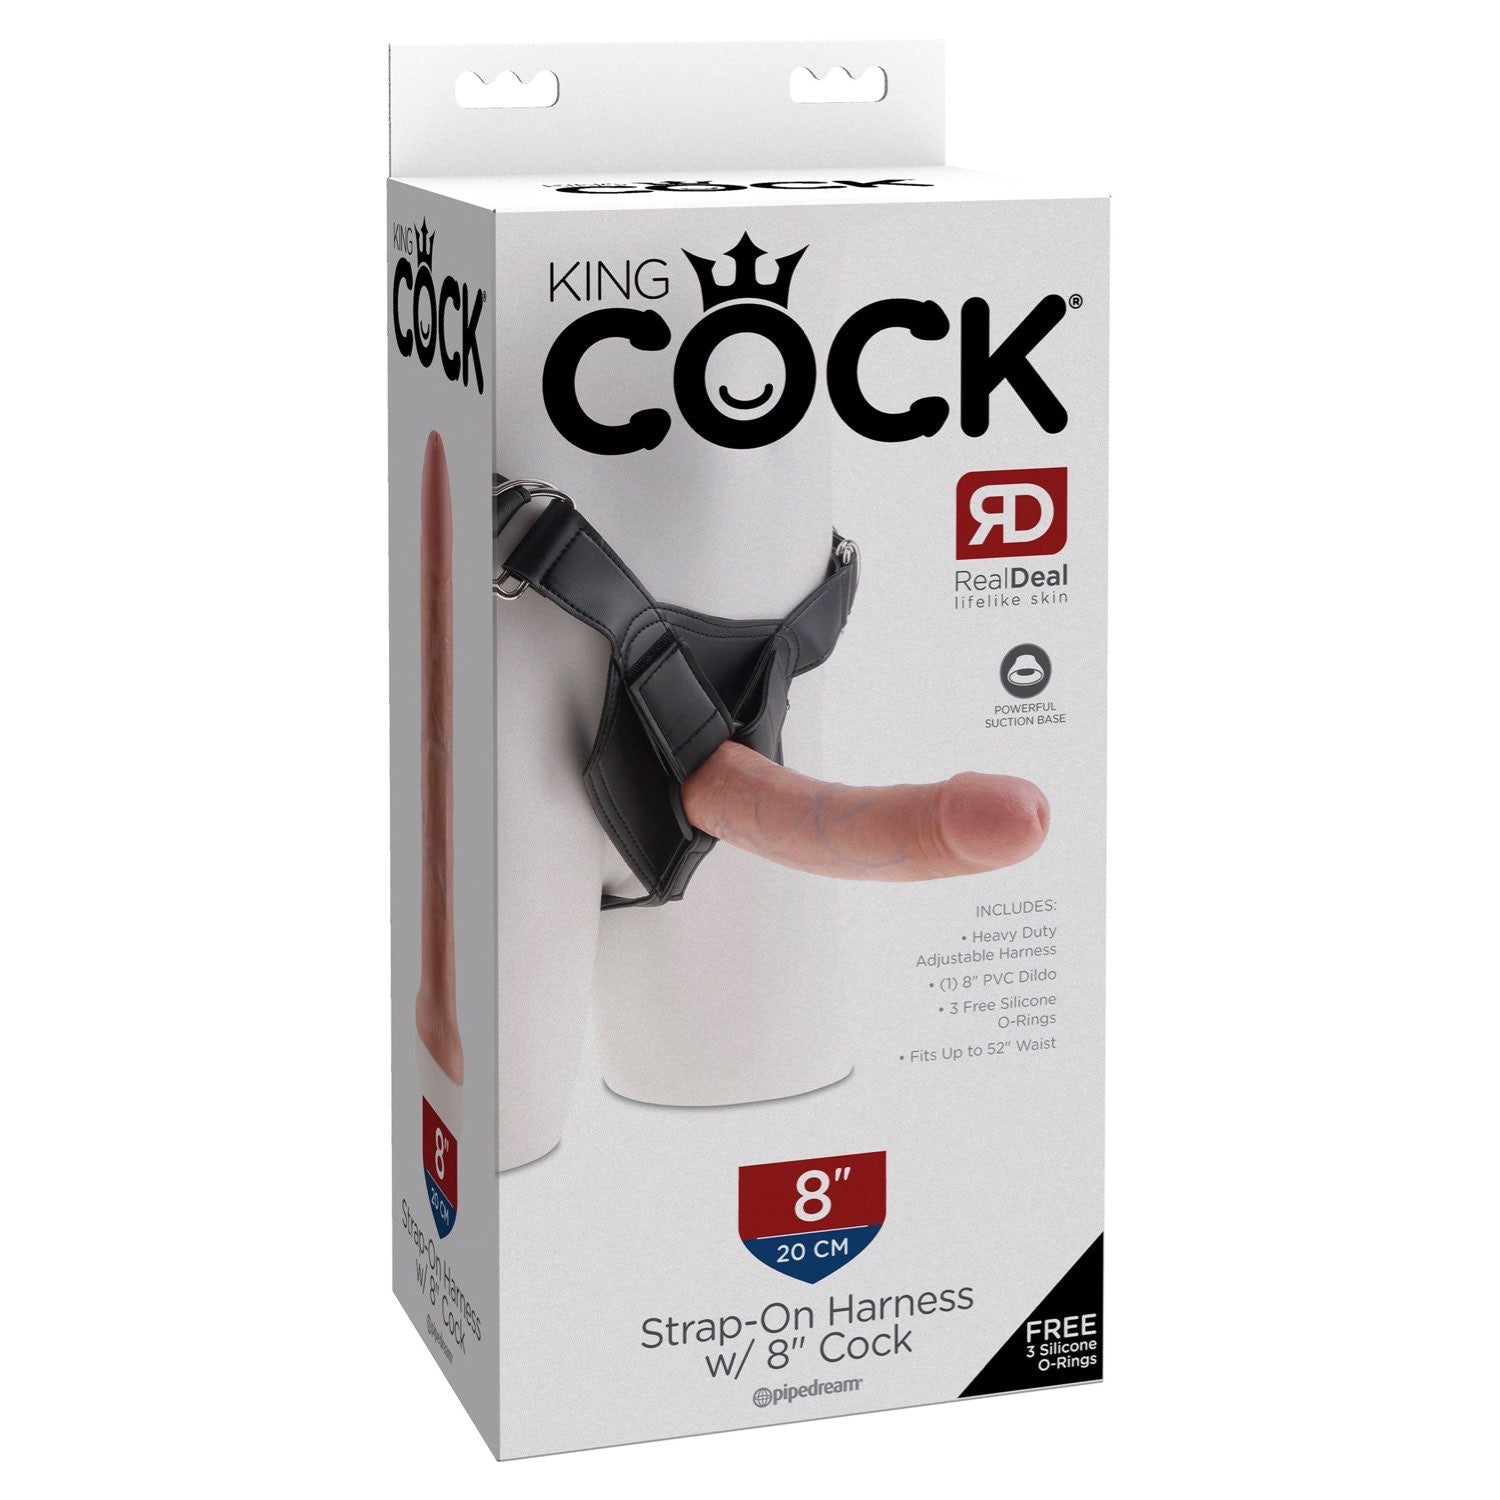 King Cock Strap-on Harness With 8&quot; Cock - Flesh 20.3 cm (8&quot;) Strap-On by Pipedream